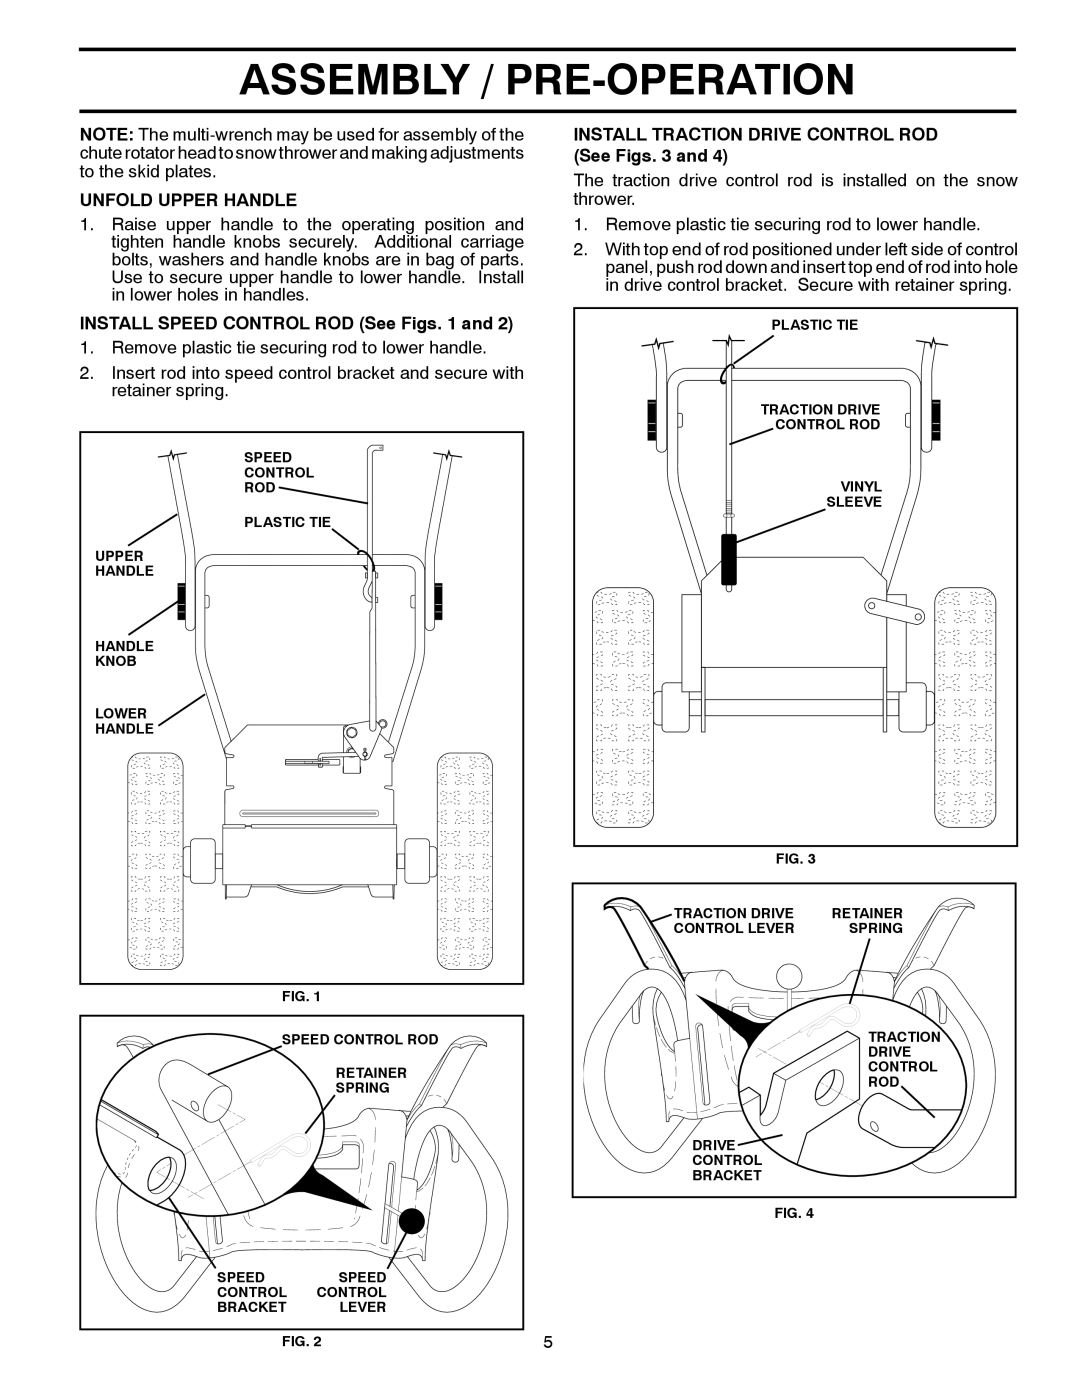 Poulan 96198002601 Assembly / Pre-Operation, Unfold Upper Handle, INSTALL SPEED CONTROL ROD See Figs. 1 and, Plastic Tie 